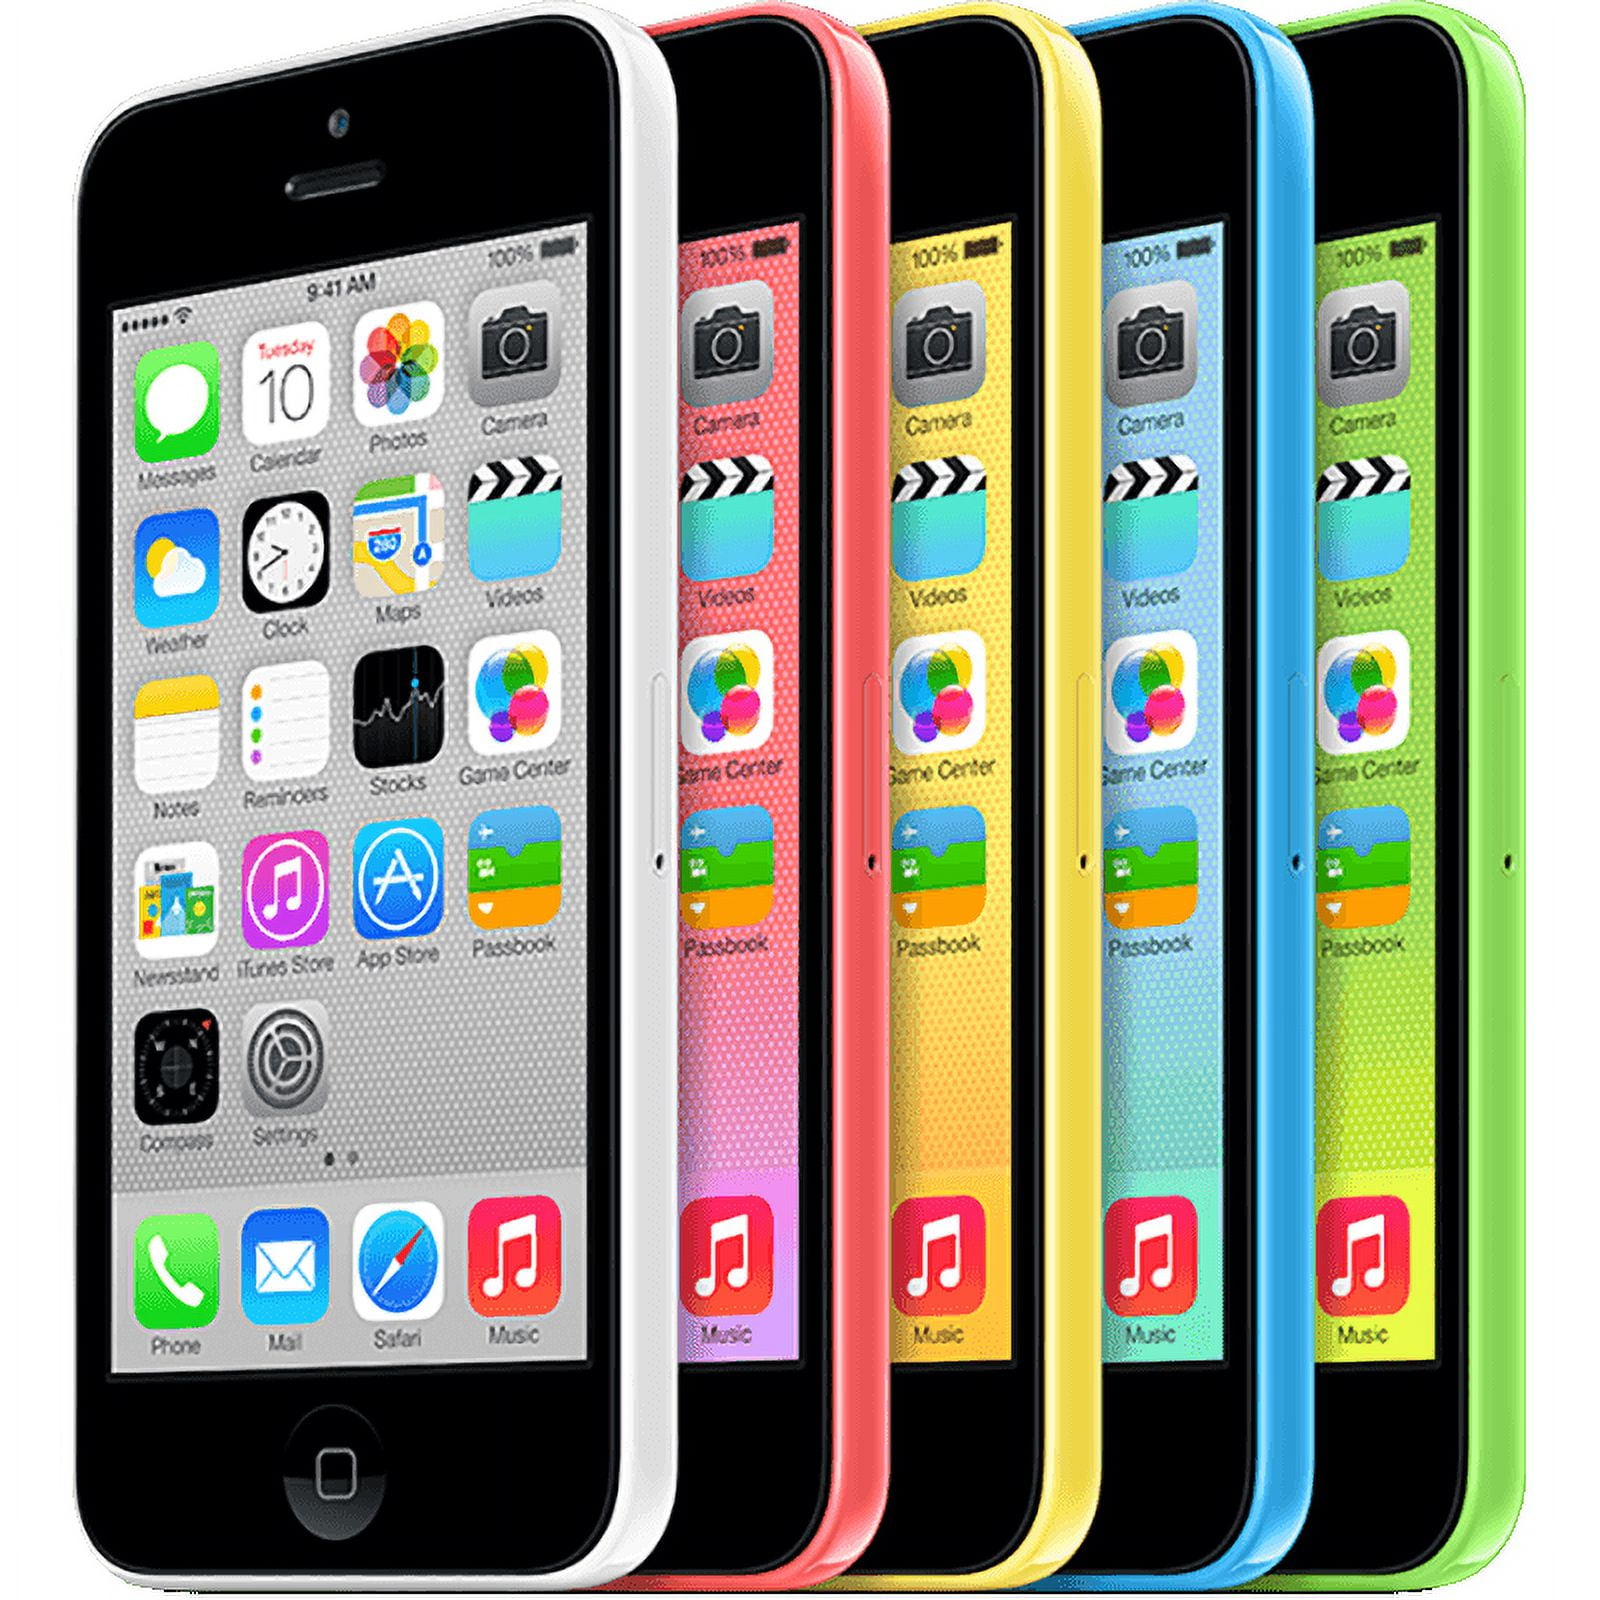 iPhone 5c is now considered a 'vintage' device with limited support -  9to5Mac